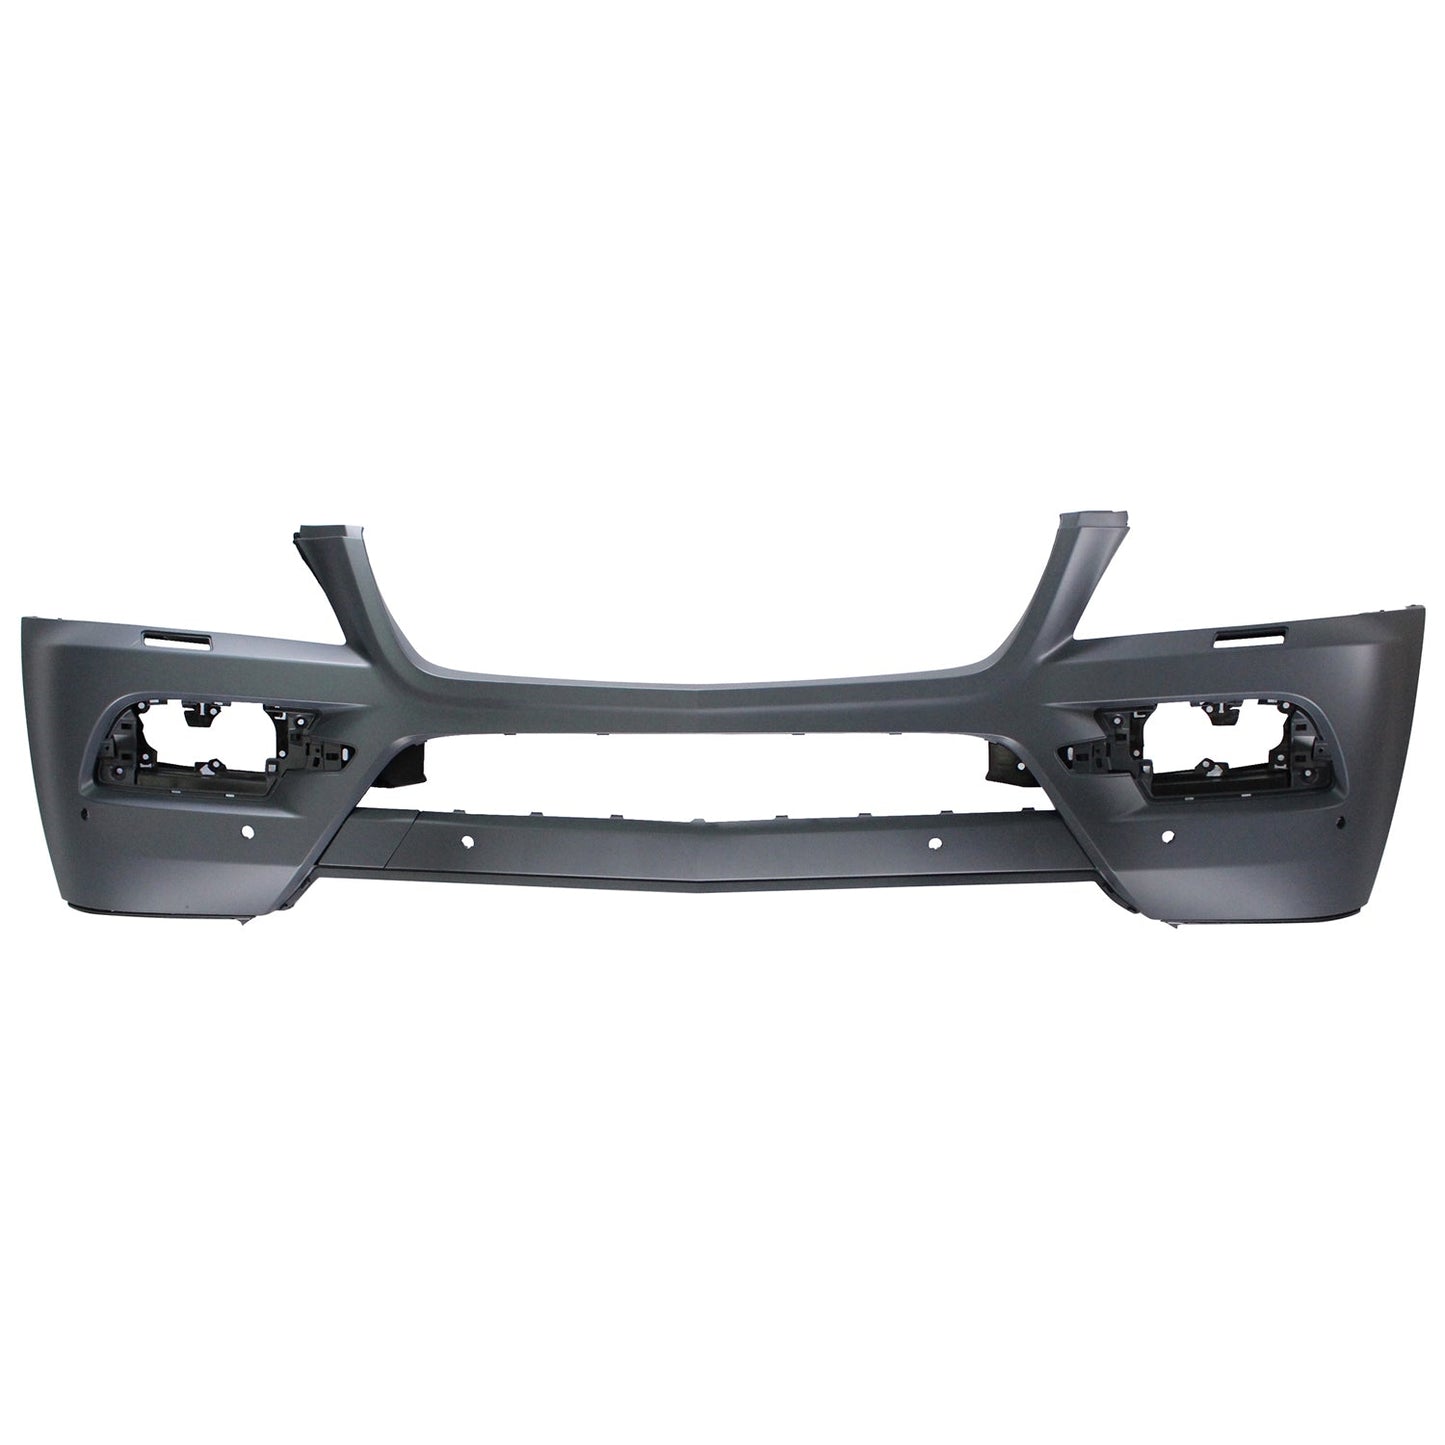 1000 | 2010-2012 MERCEDES-BENZ GL350 Front bumper cover X164; w/Parktronic; w/Active Lighting; prime | MB1000489|16488504389999